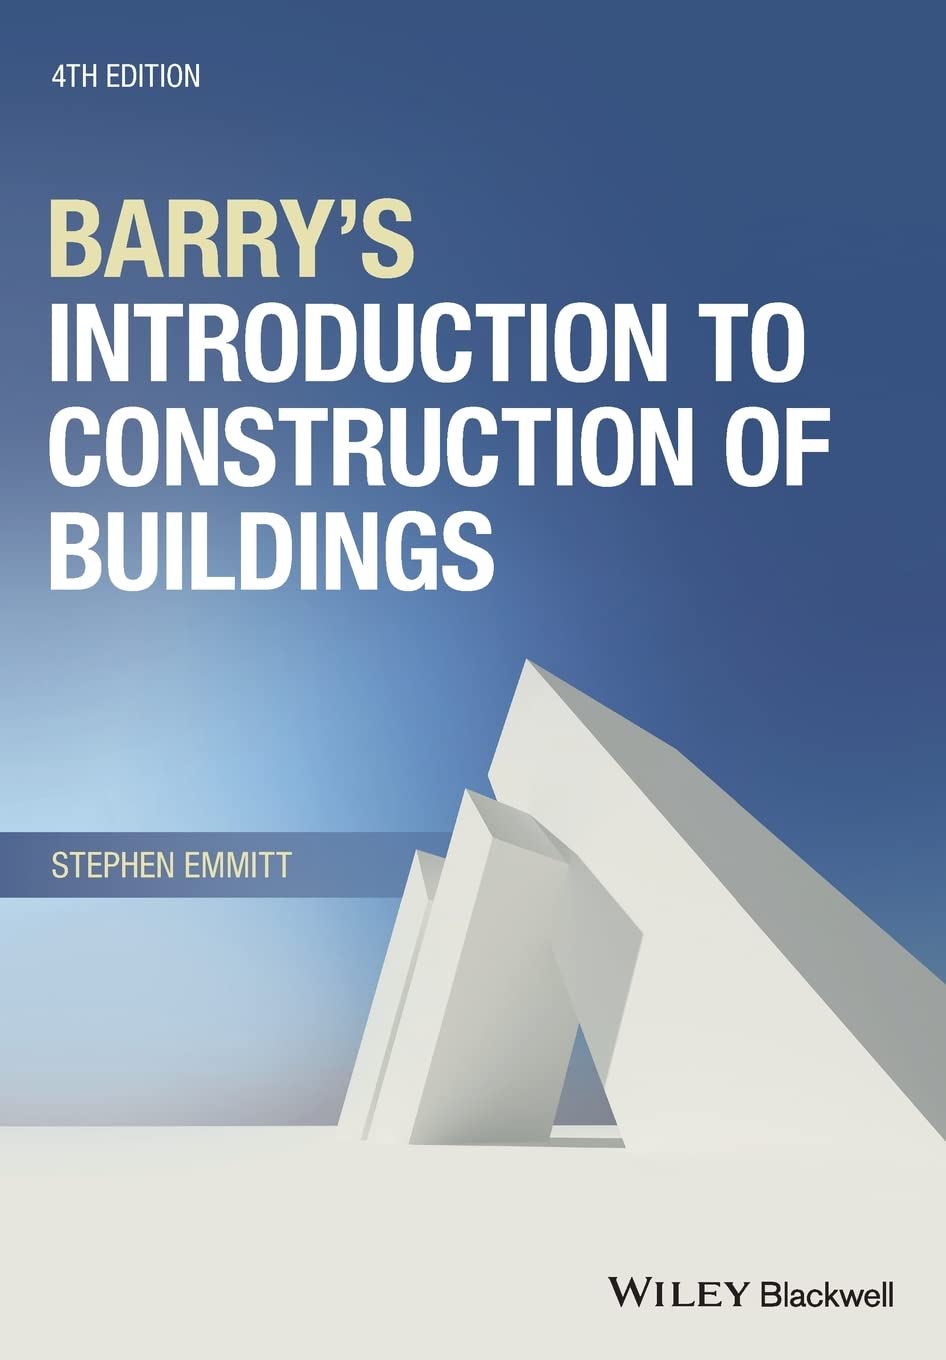 Introduction to Construction of Buildings